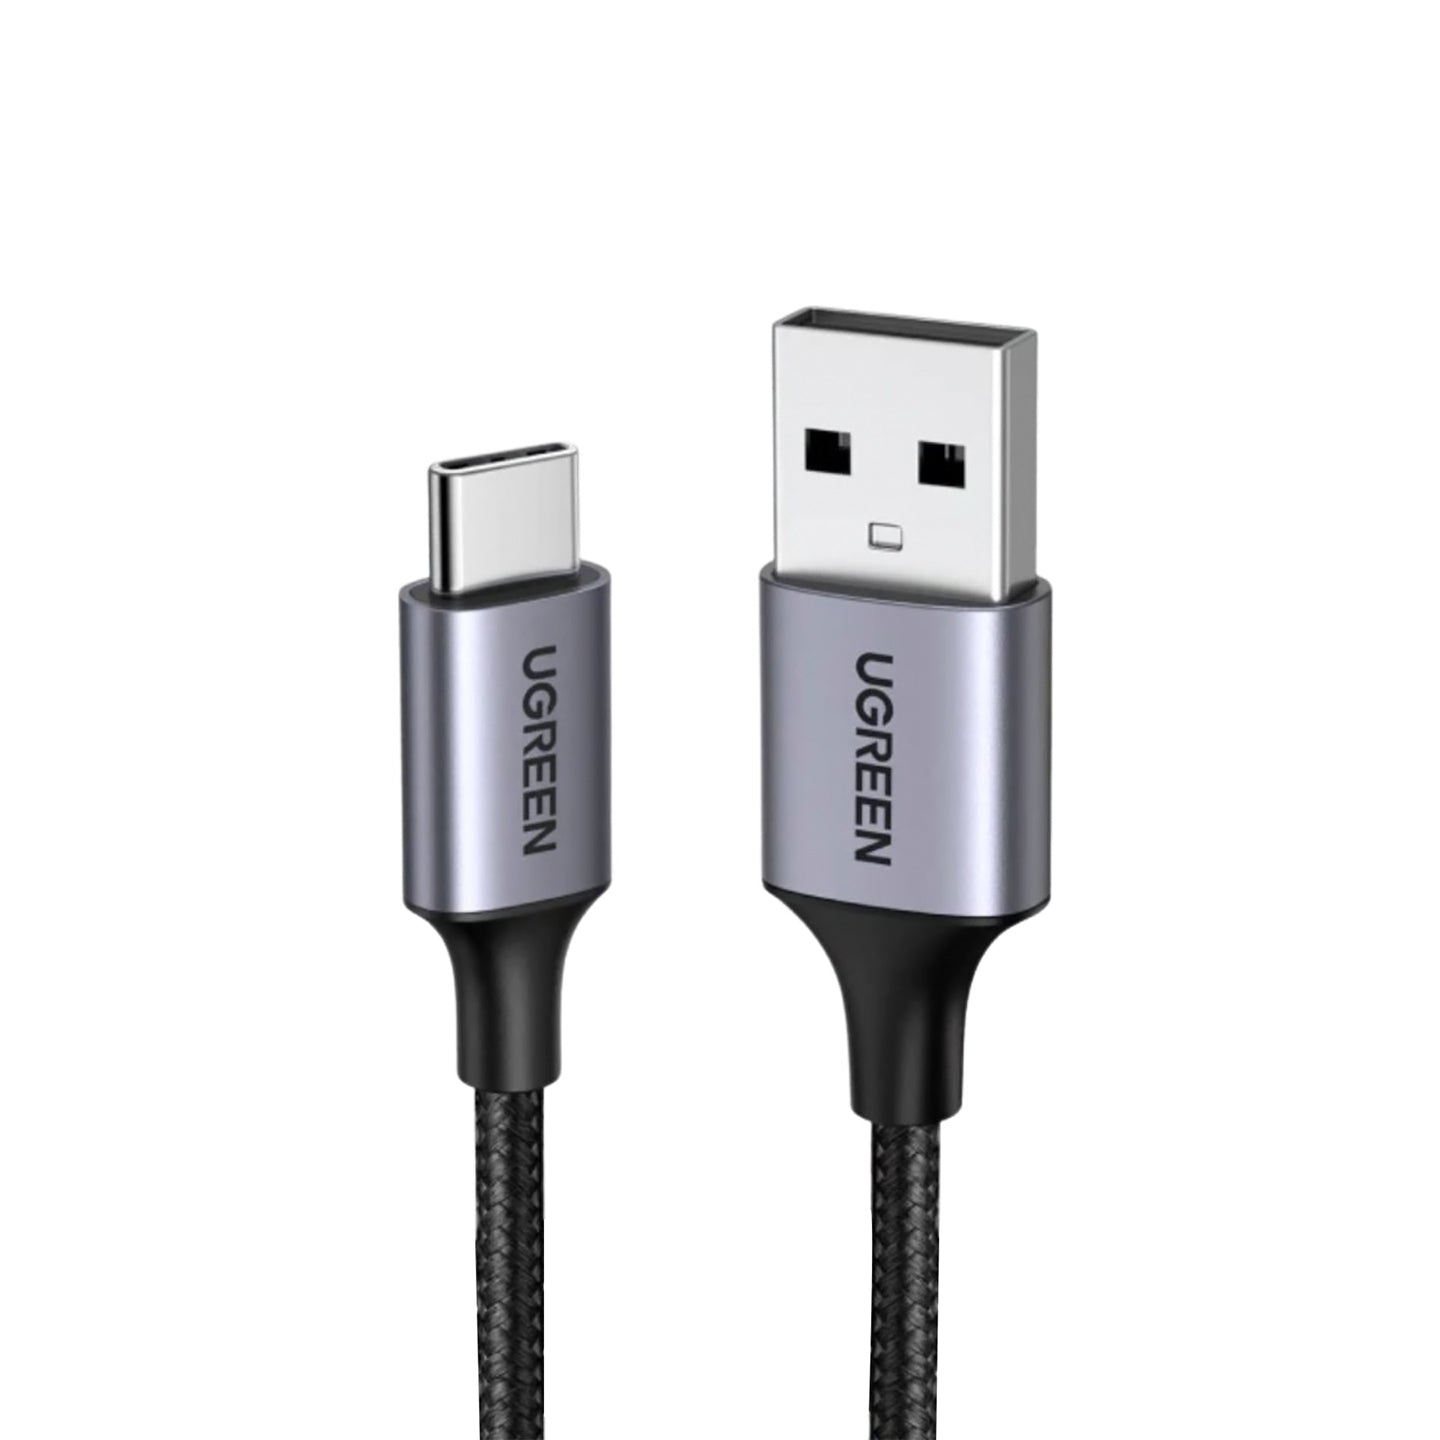 UGREEN USB-A 2.0 to USB-C Cable with Tinned Copper Core and Multiple Shielding Layer for Smartphones and Tablets (Available in 0.25M, 0.5M, 1M, 1.5M and 2M)